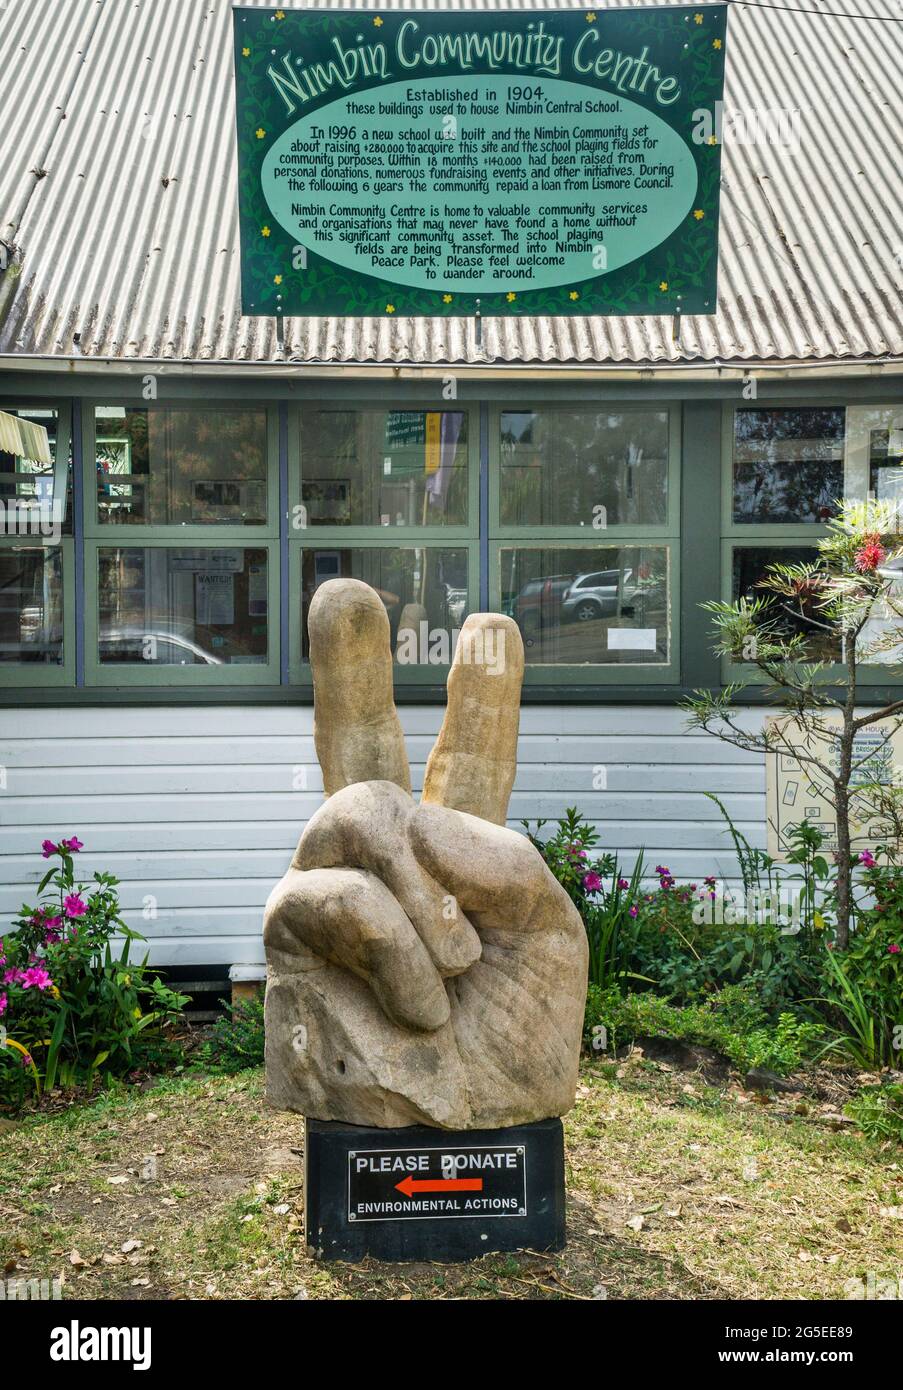 victory sculpture at the Nimbin Community Centre, Nimbin, Northern Rivers area, New South Wales, Australia Stock Photo